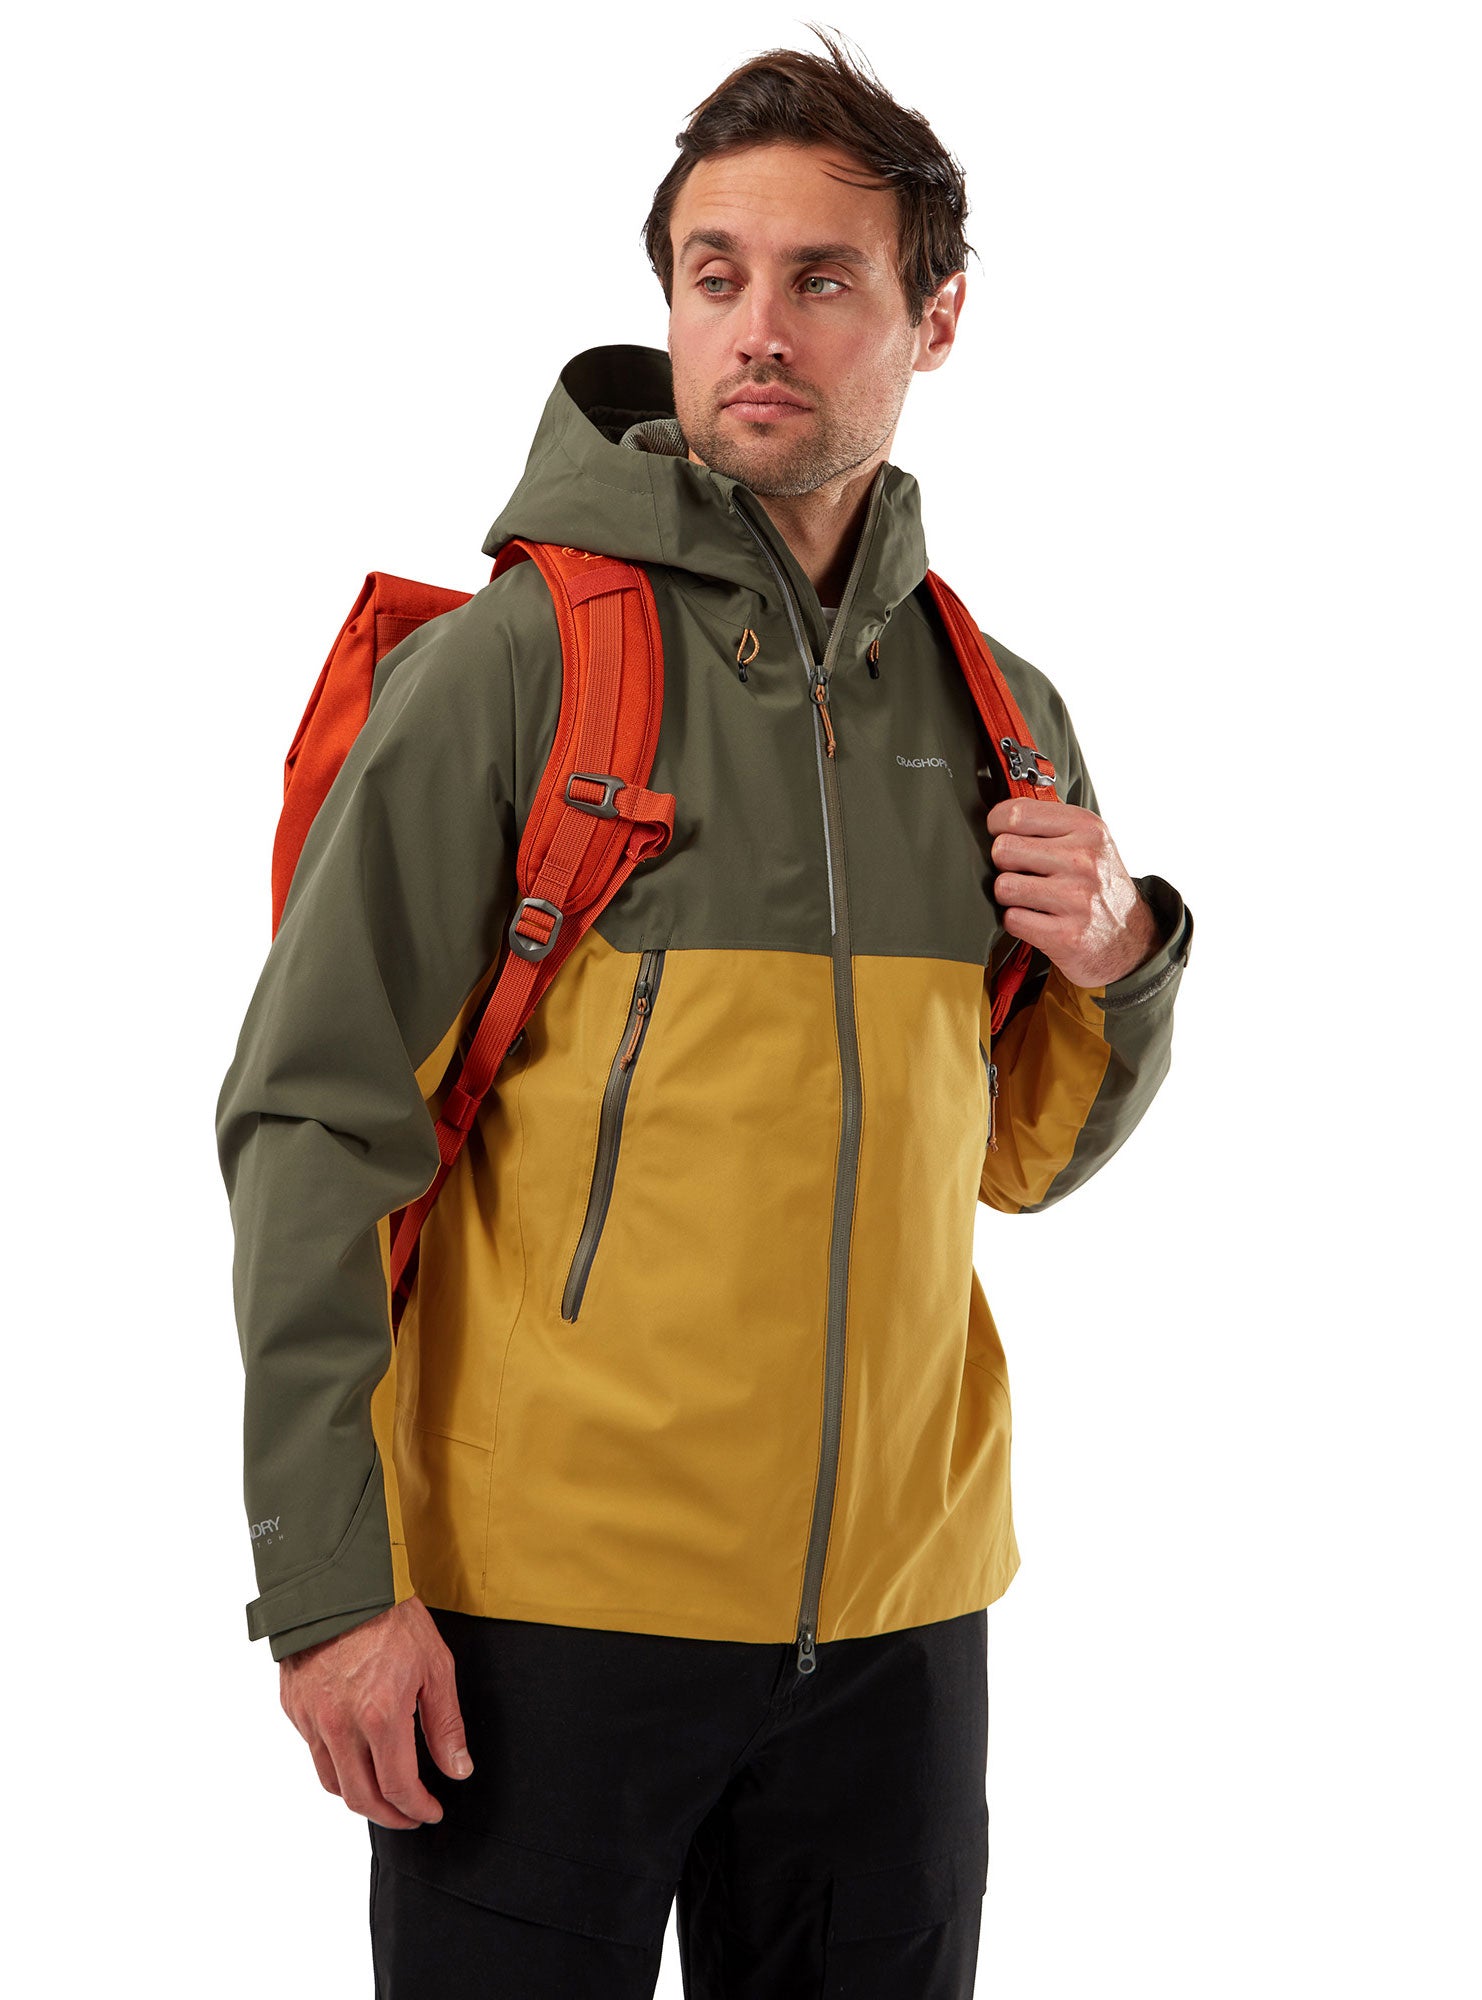 Green and Gold Craghoppers Trelawney Waterproof Jacket